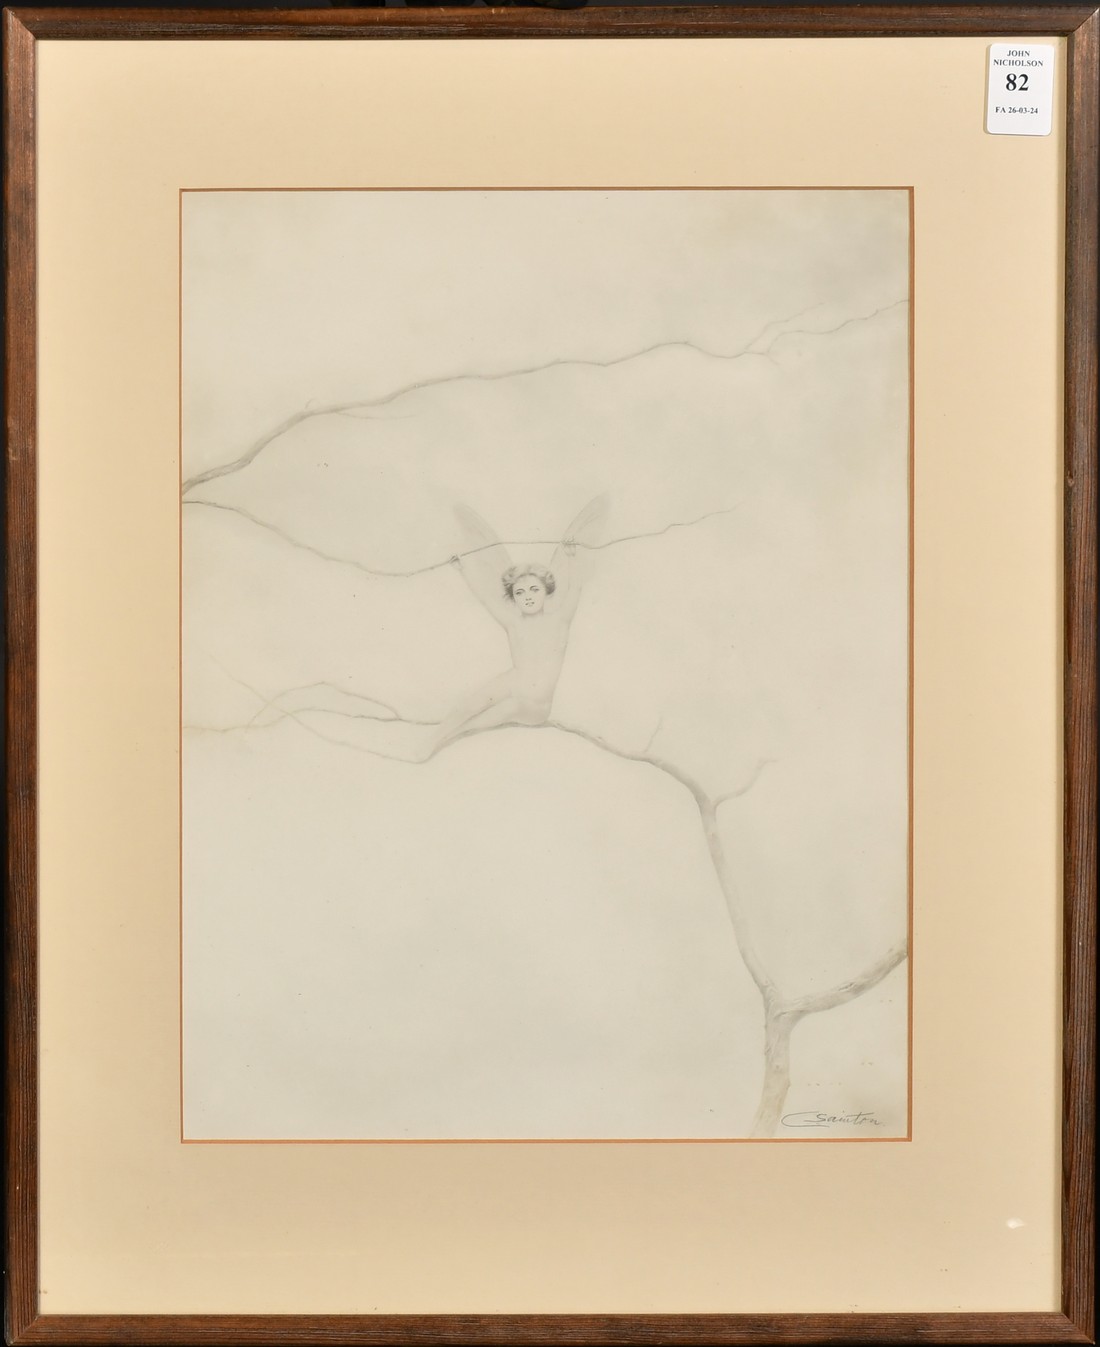 Charles Prosper Sainton (1861-1914), an angel on a branch, silverpoint drawing, signed in pencil, - Image 2 of 4